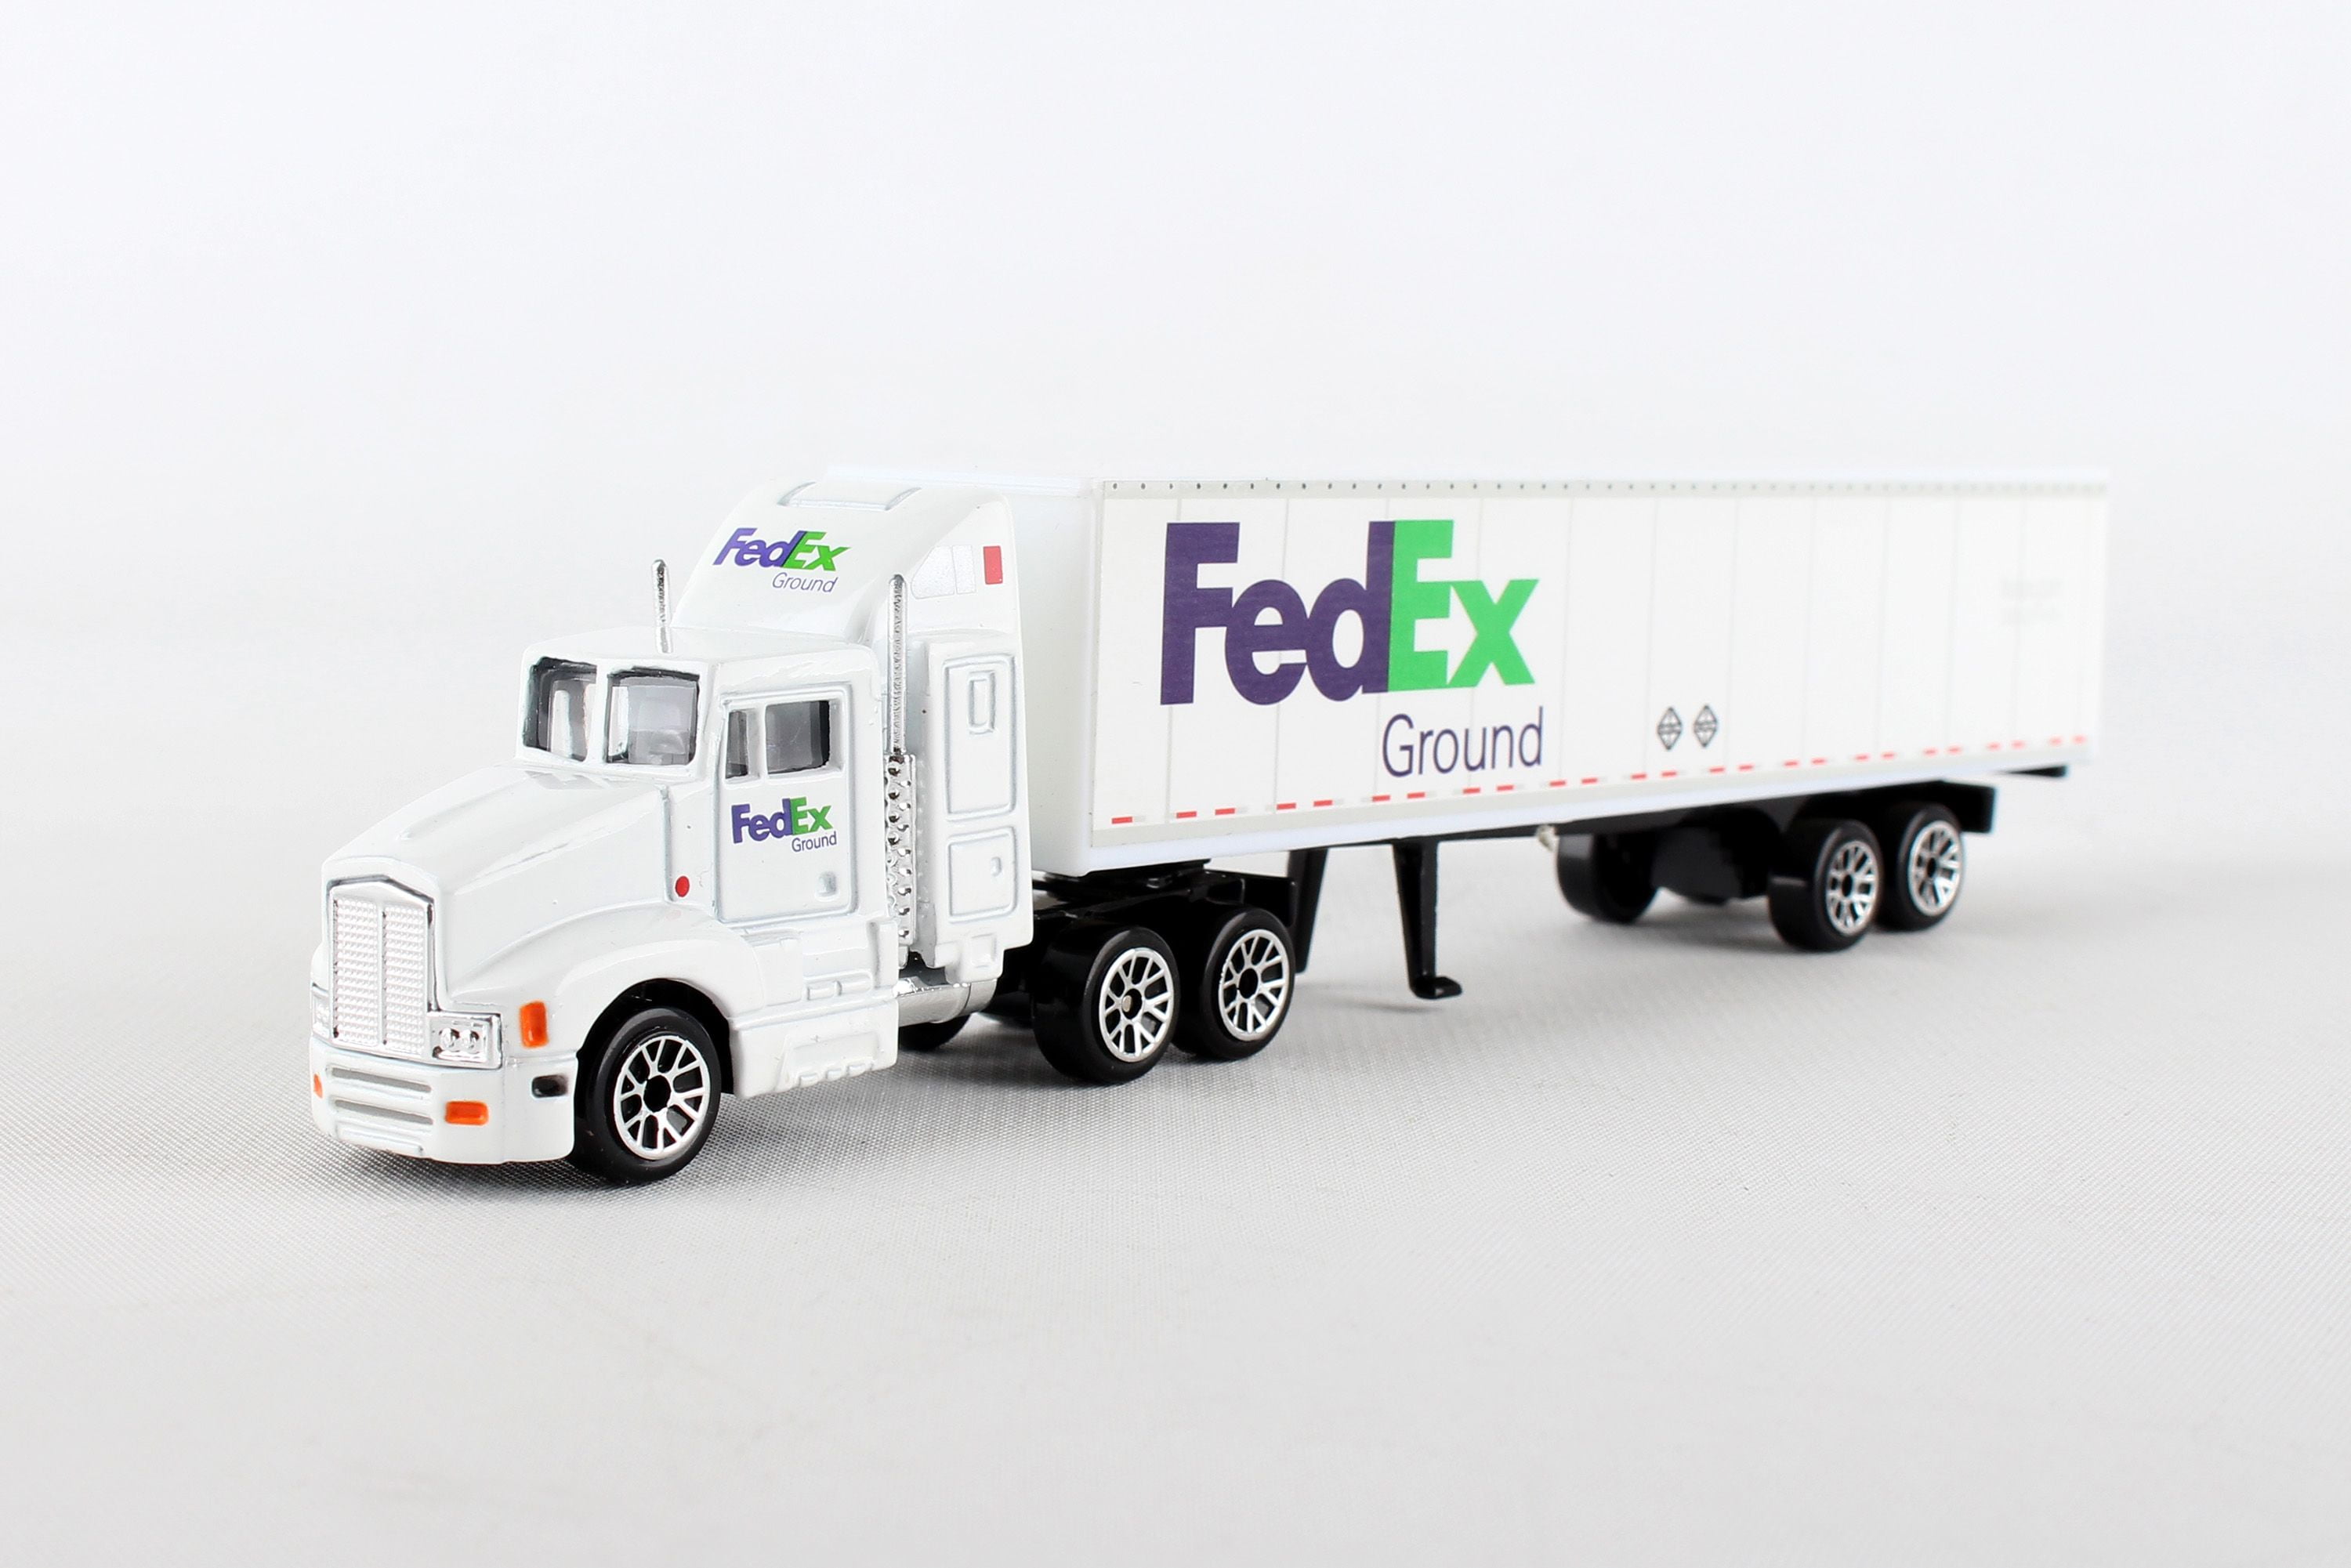 New 7"  Fedex Ground Tractor Trailer Toy Semi Truck free shipping